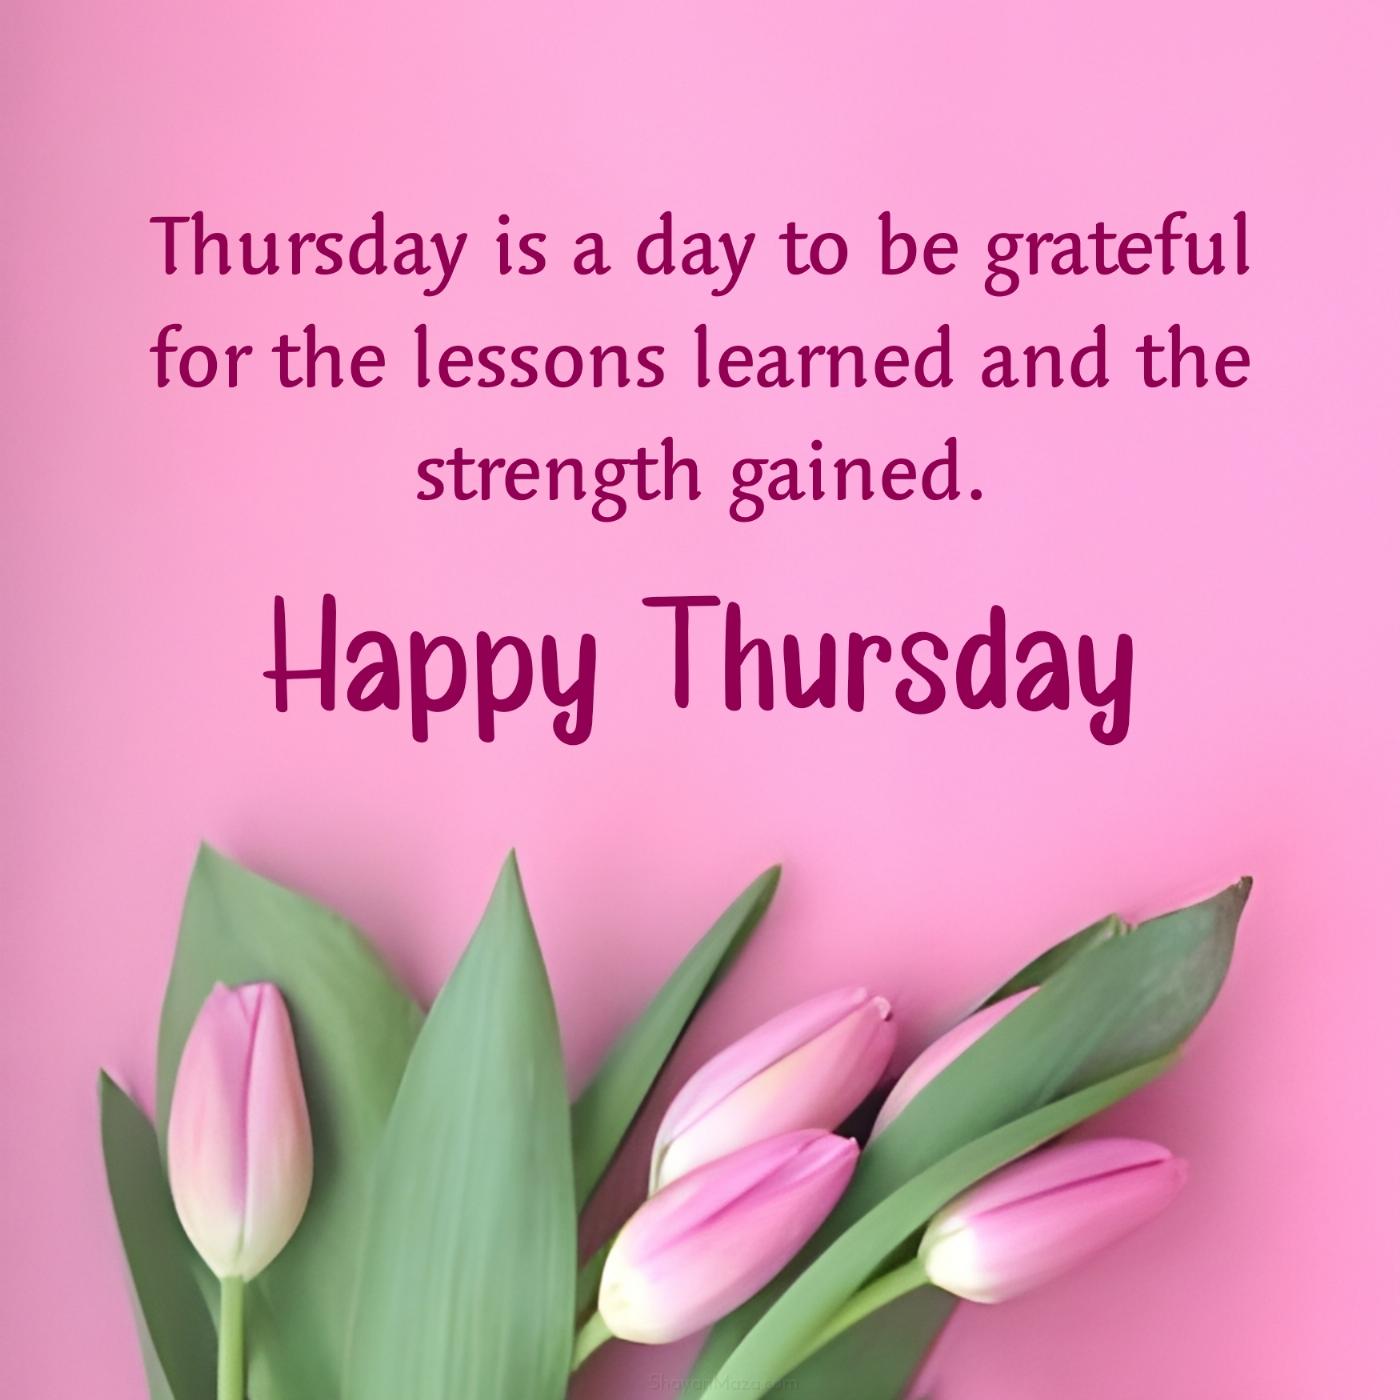 Thursday is a day to be grateful for the lessons learned